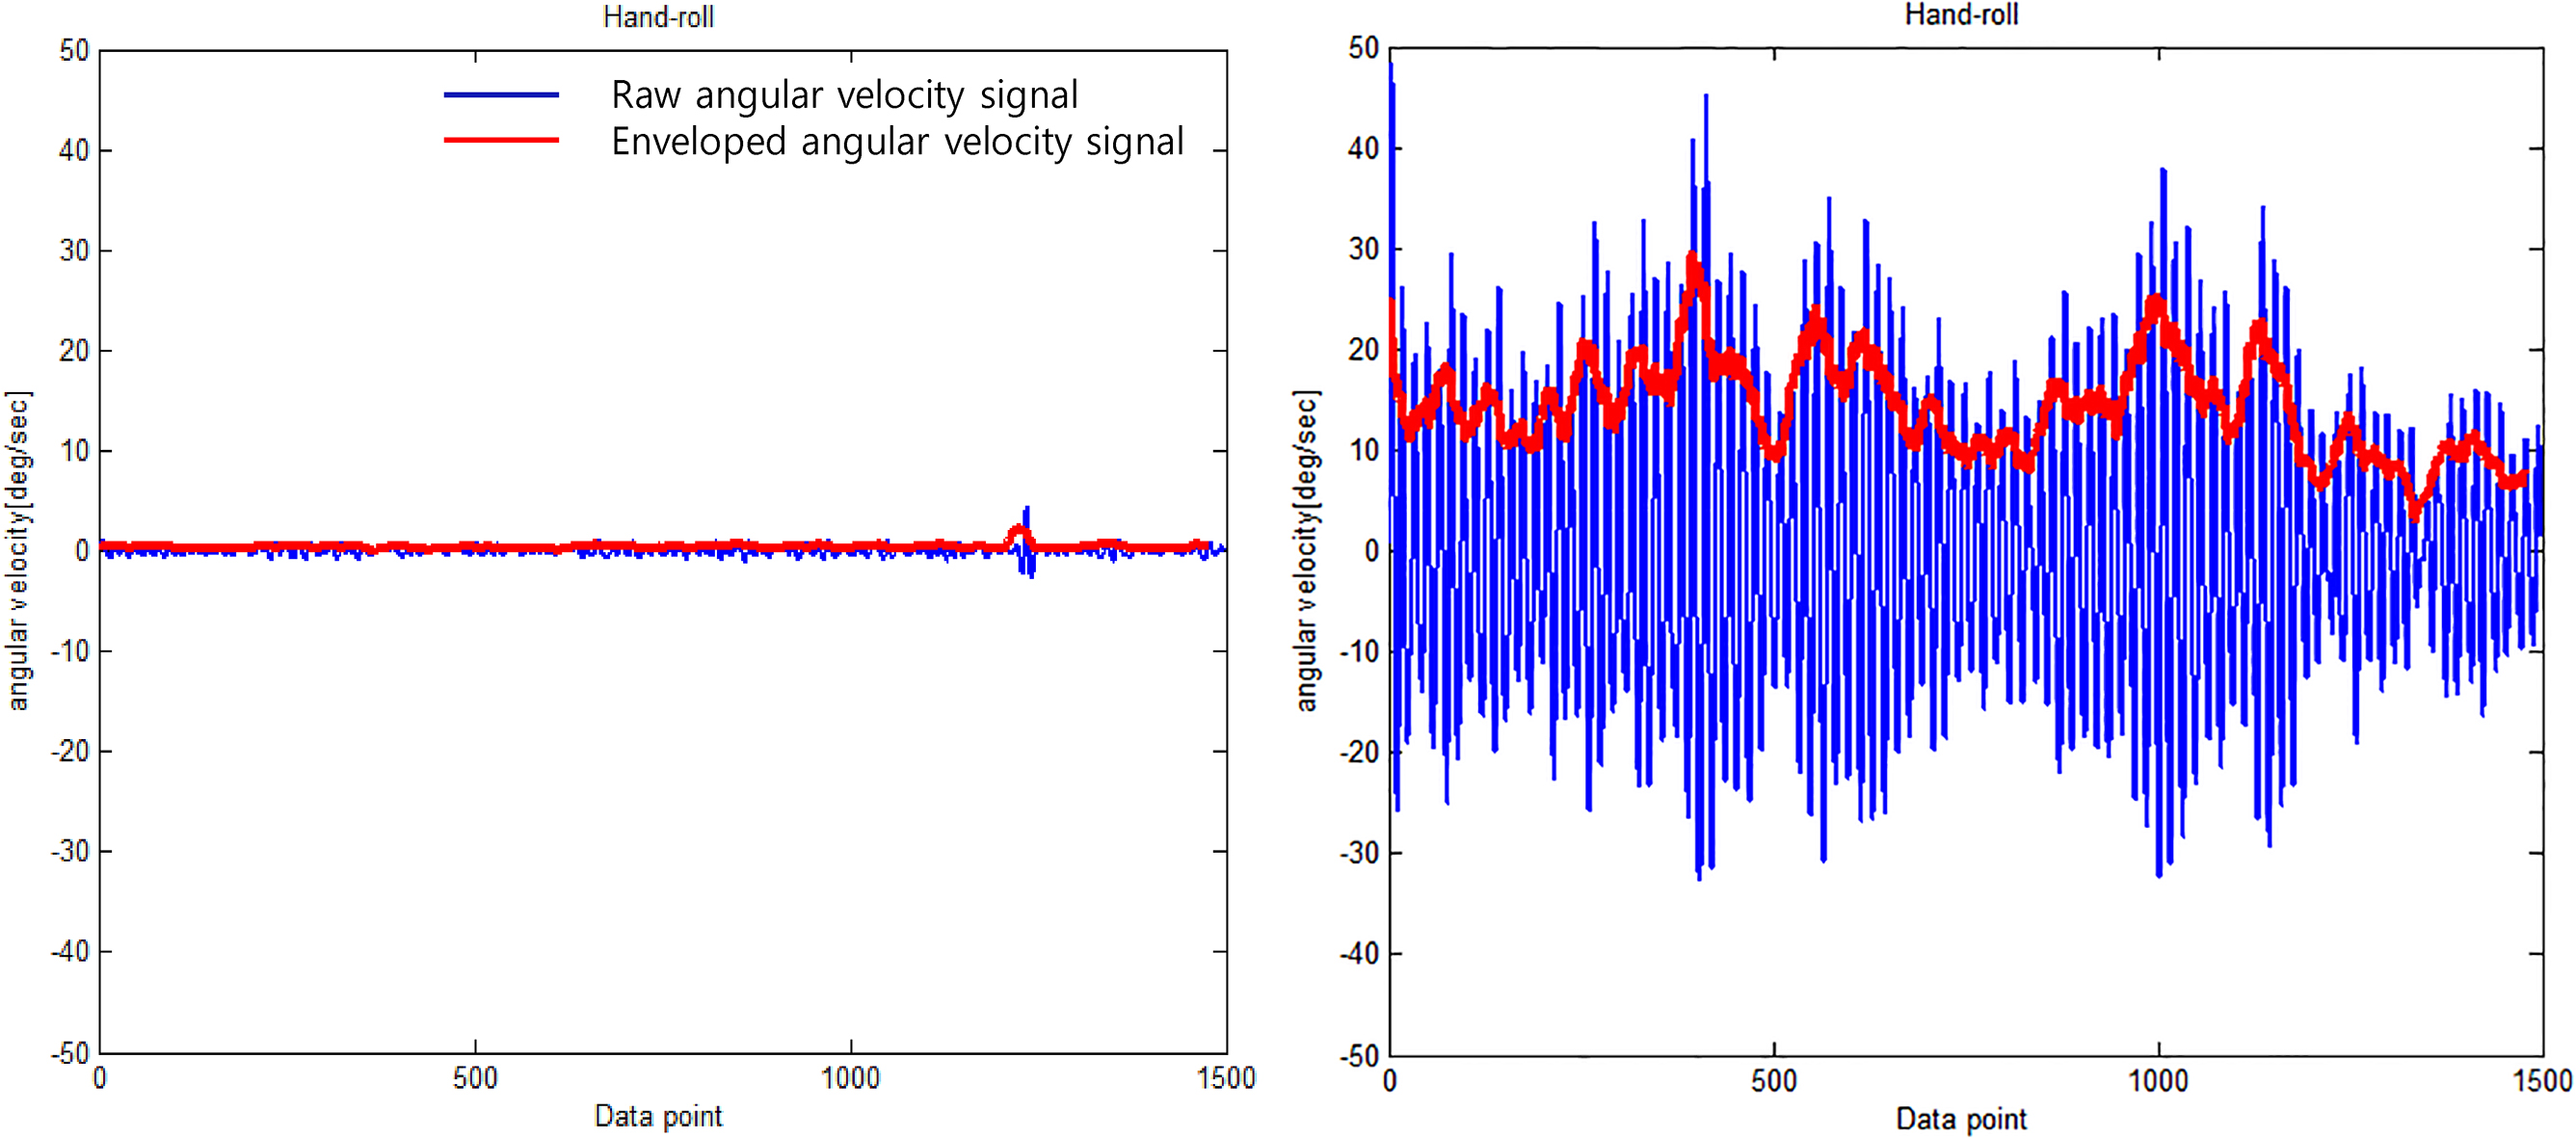 Typical angular velocity signal of the roll direction in patients with mild tremor (left) and severe tremor (right).